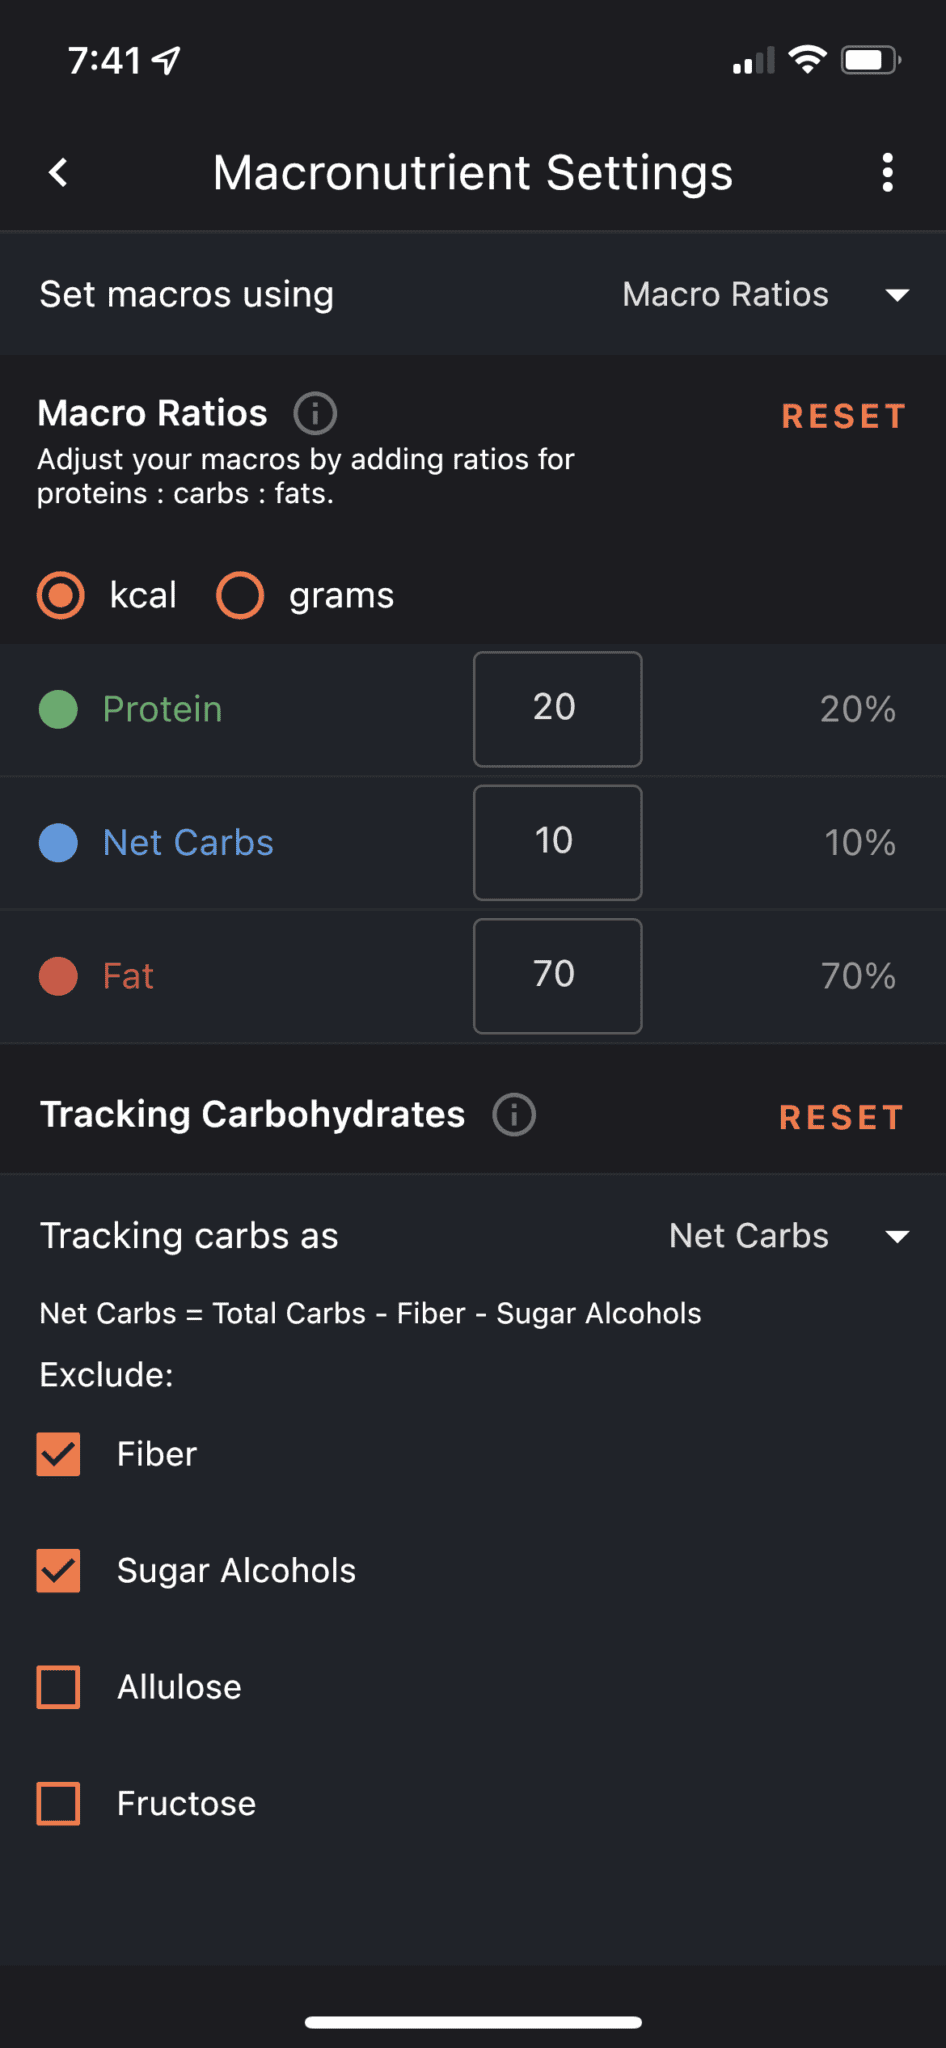 Set your macro ratios and change to net carbs.